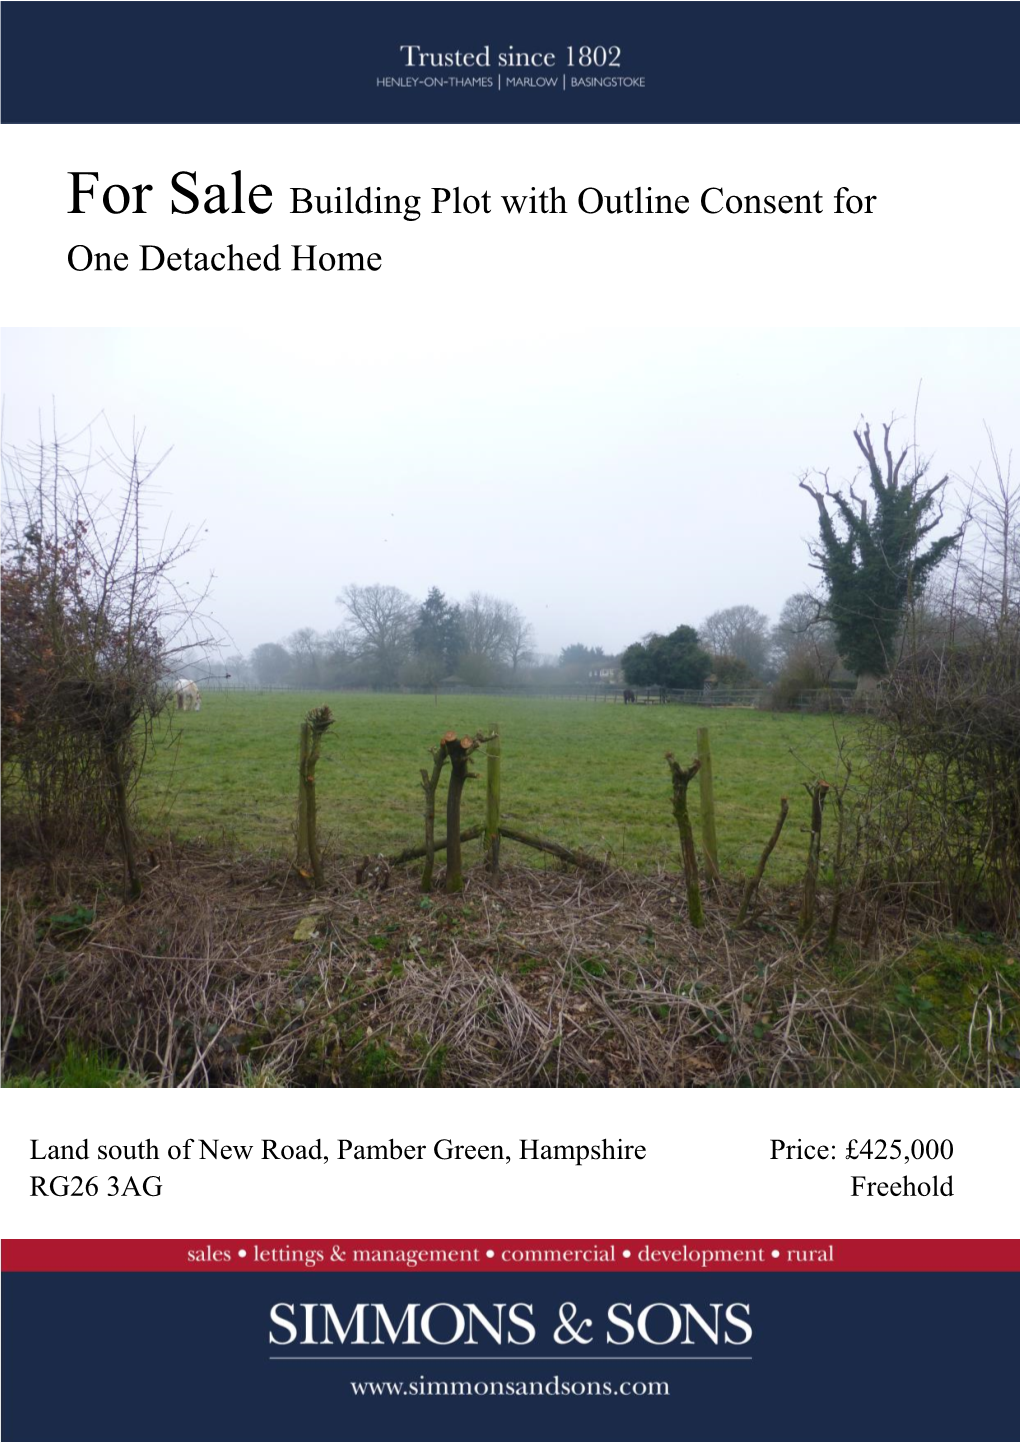 For Sale Building Plot with Outline Consent for One Detached Home